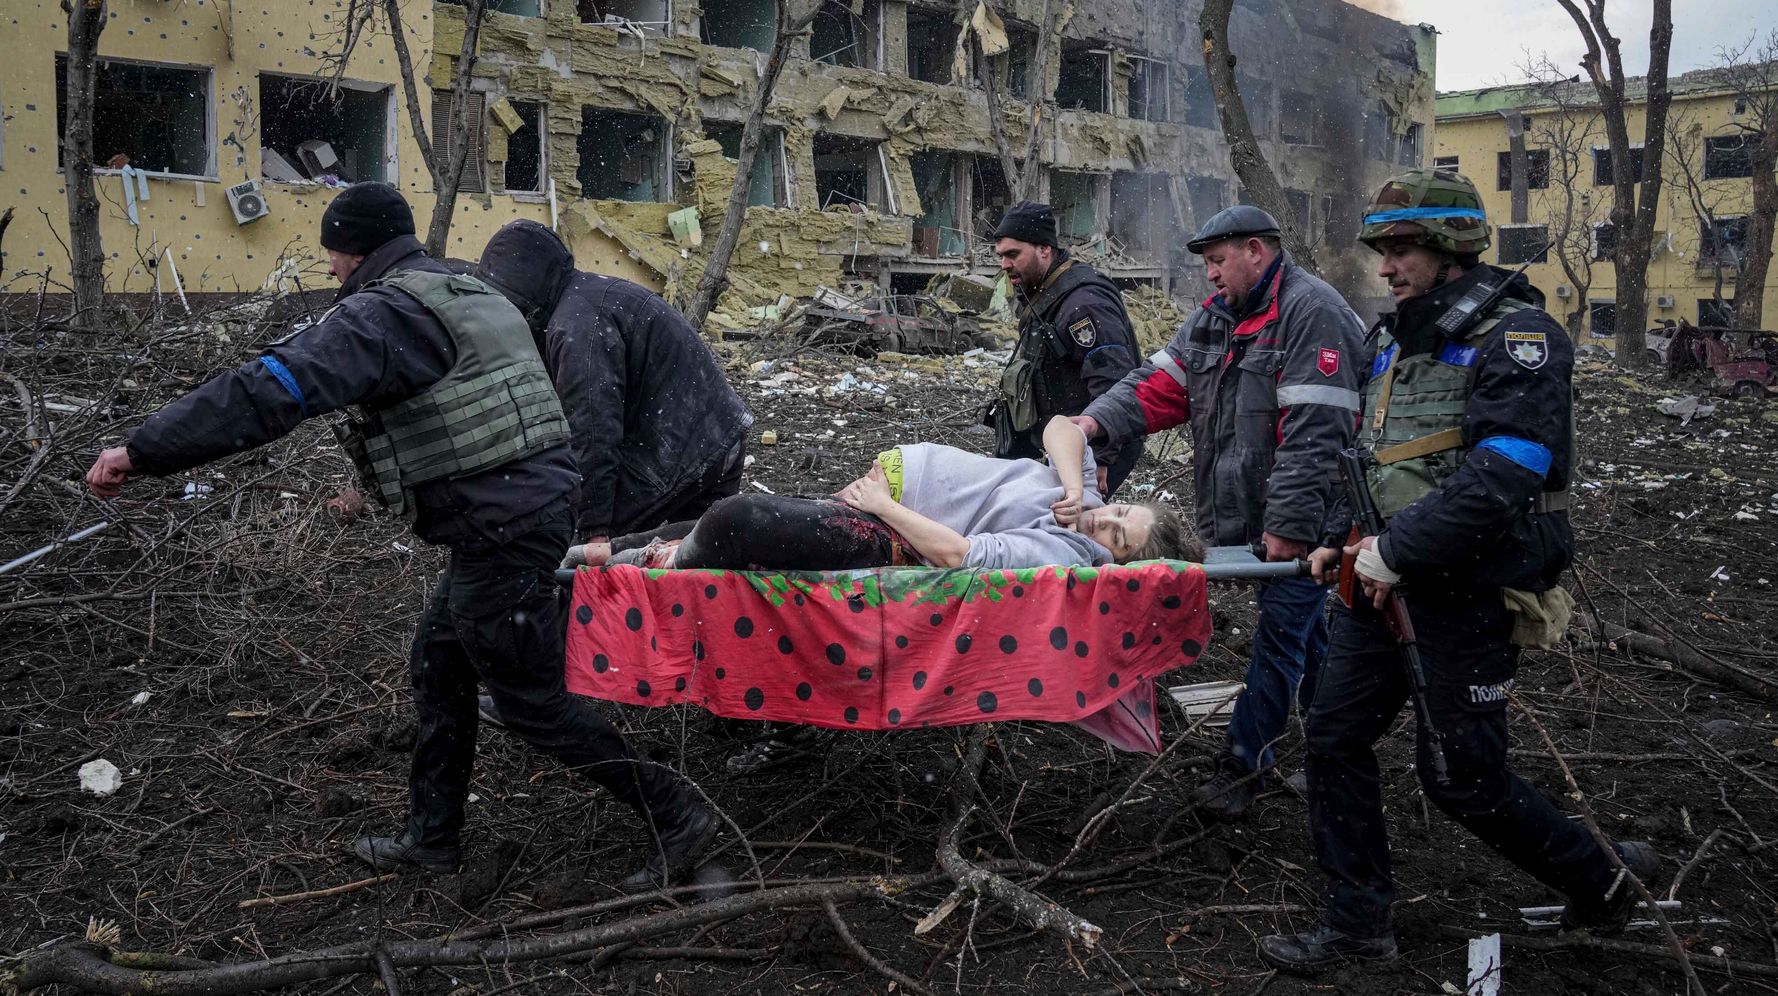 Pregnant Woman In Stretcher Photo, Baby Die After Russia Bombed Maternity Ward